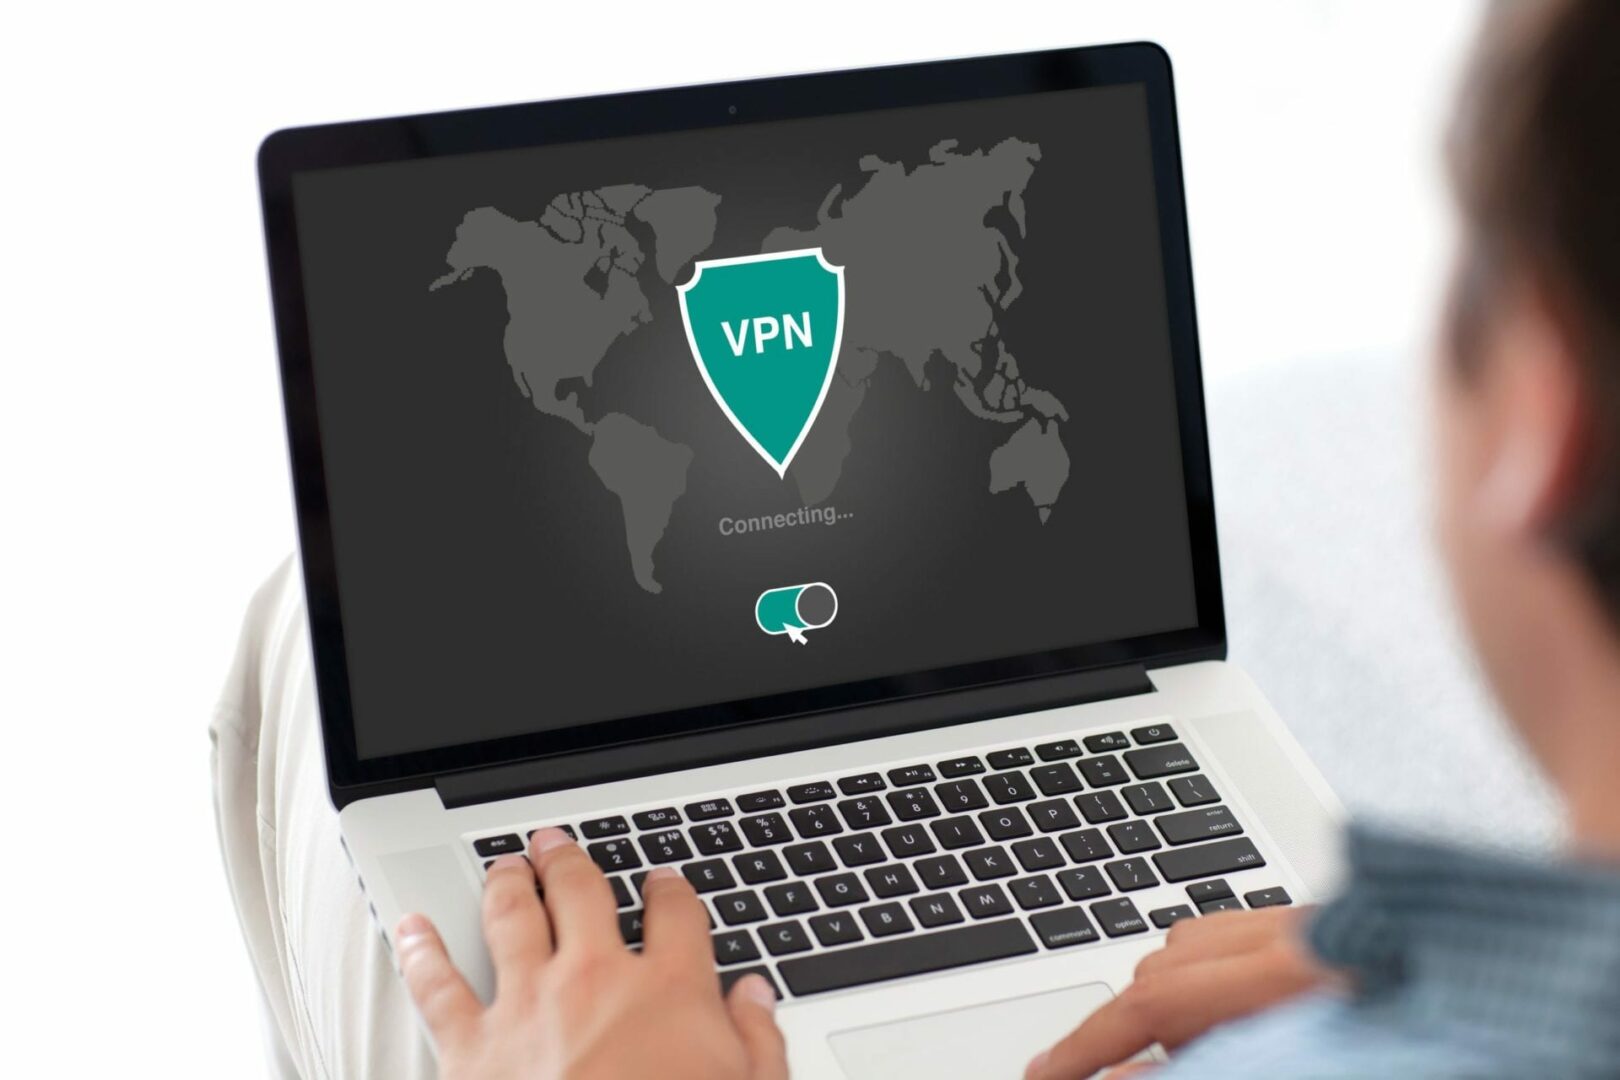 5 Best Reasons to Use a VPN When Connected to the Internet